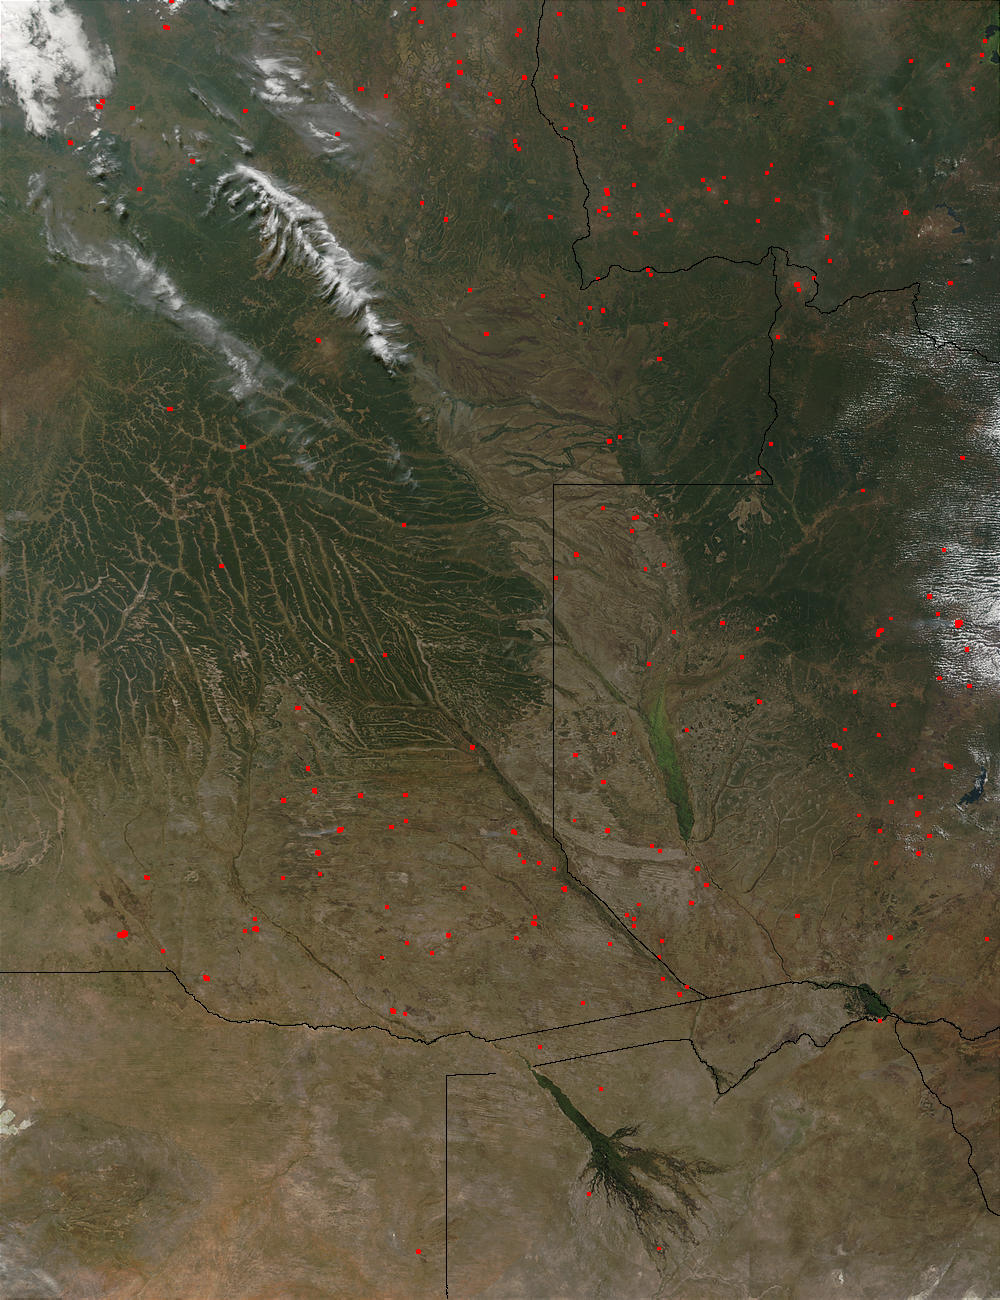 Fires in Angola, Zambia, and Democratic Republic of the Congo - related image preview